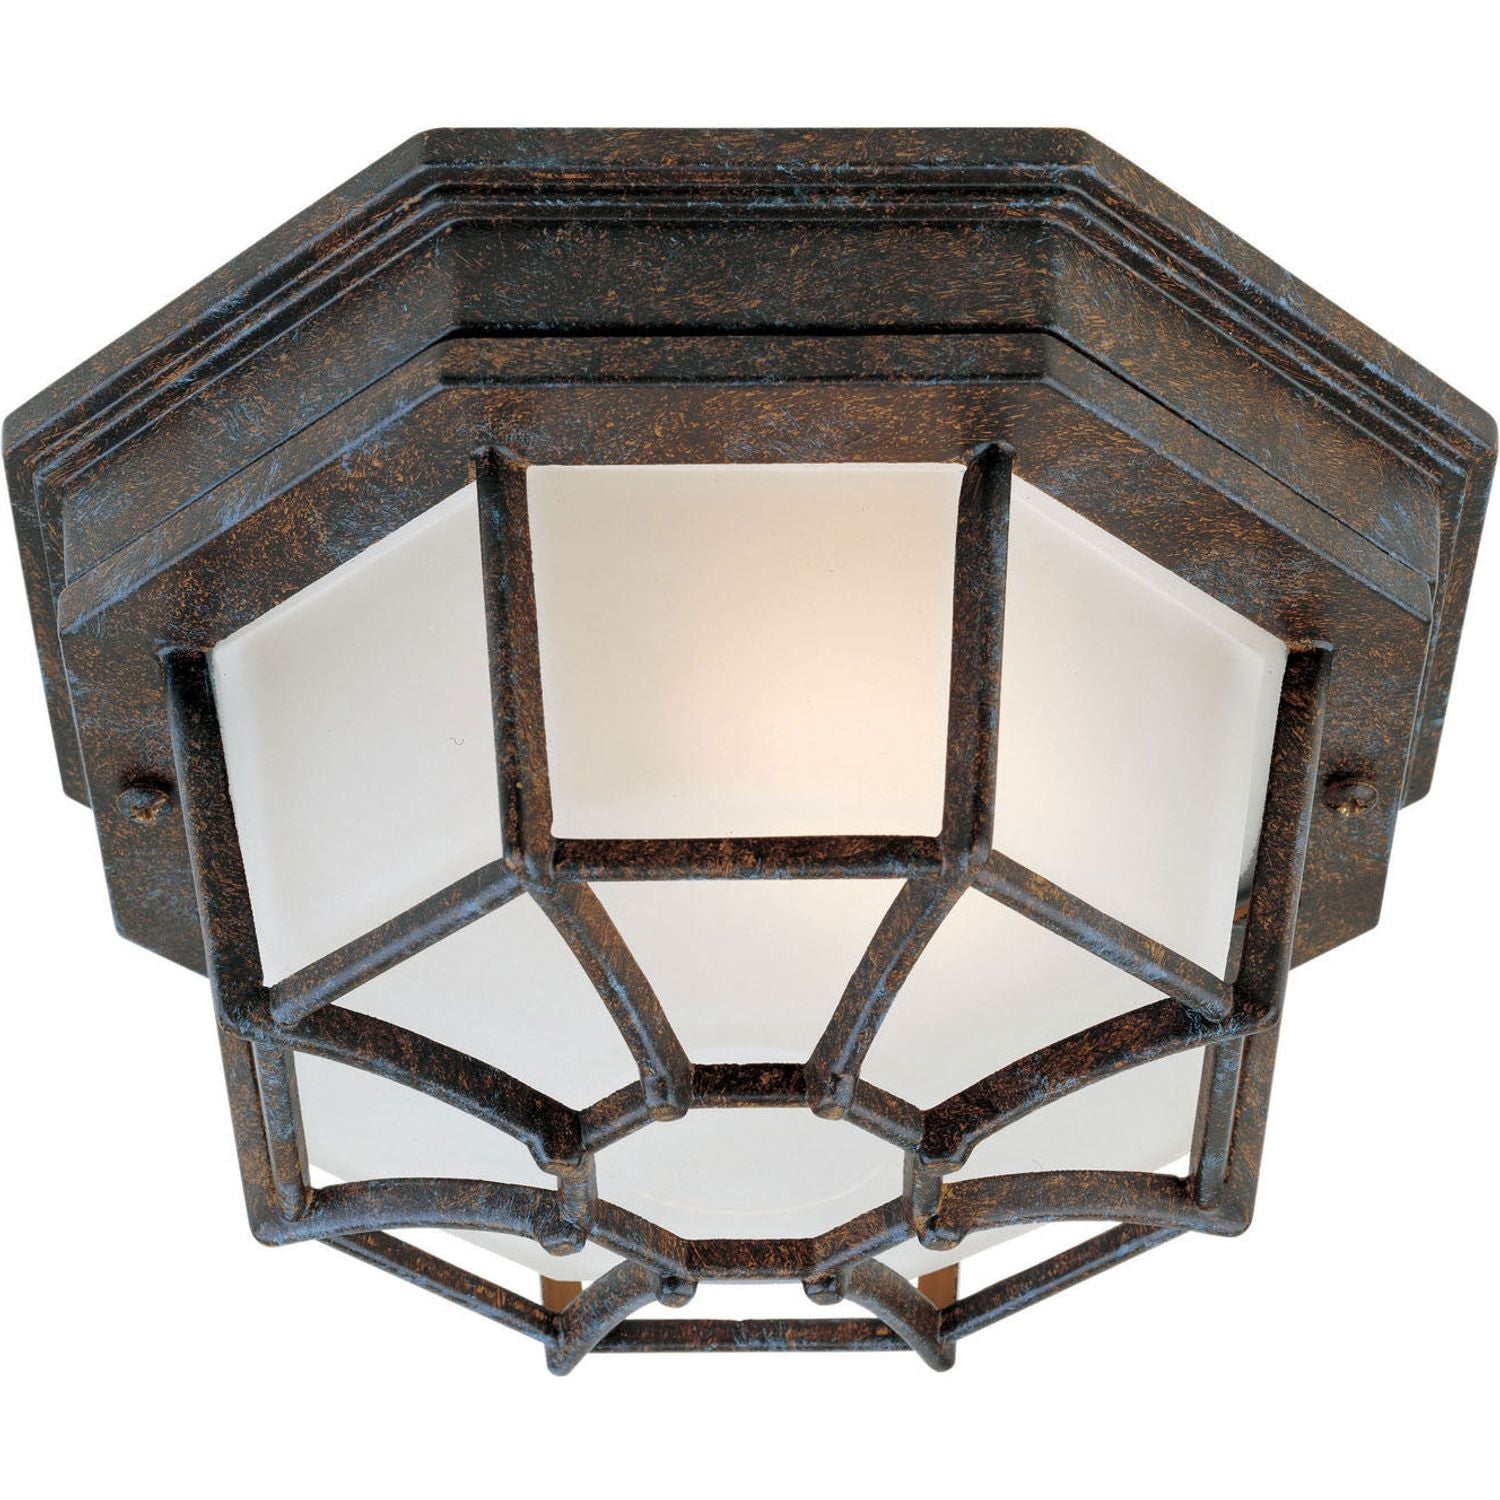 Savoy House - 5-2066-72 - One Light Flush Mount - Exterior Collections - Rustic Bronze